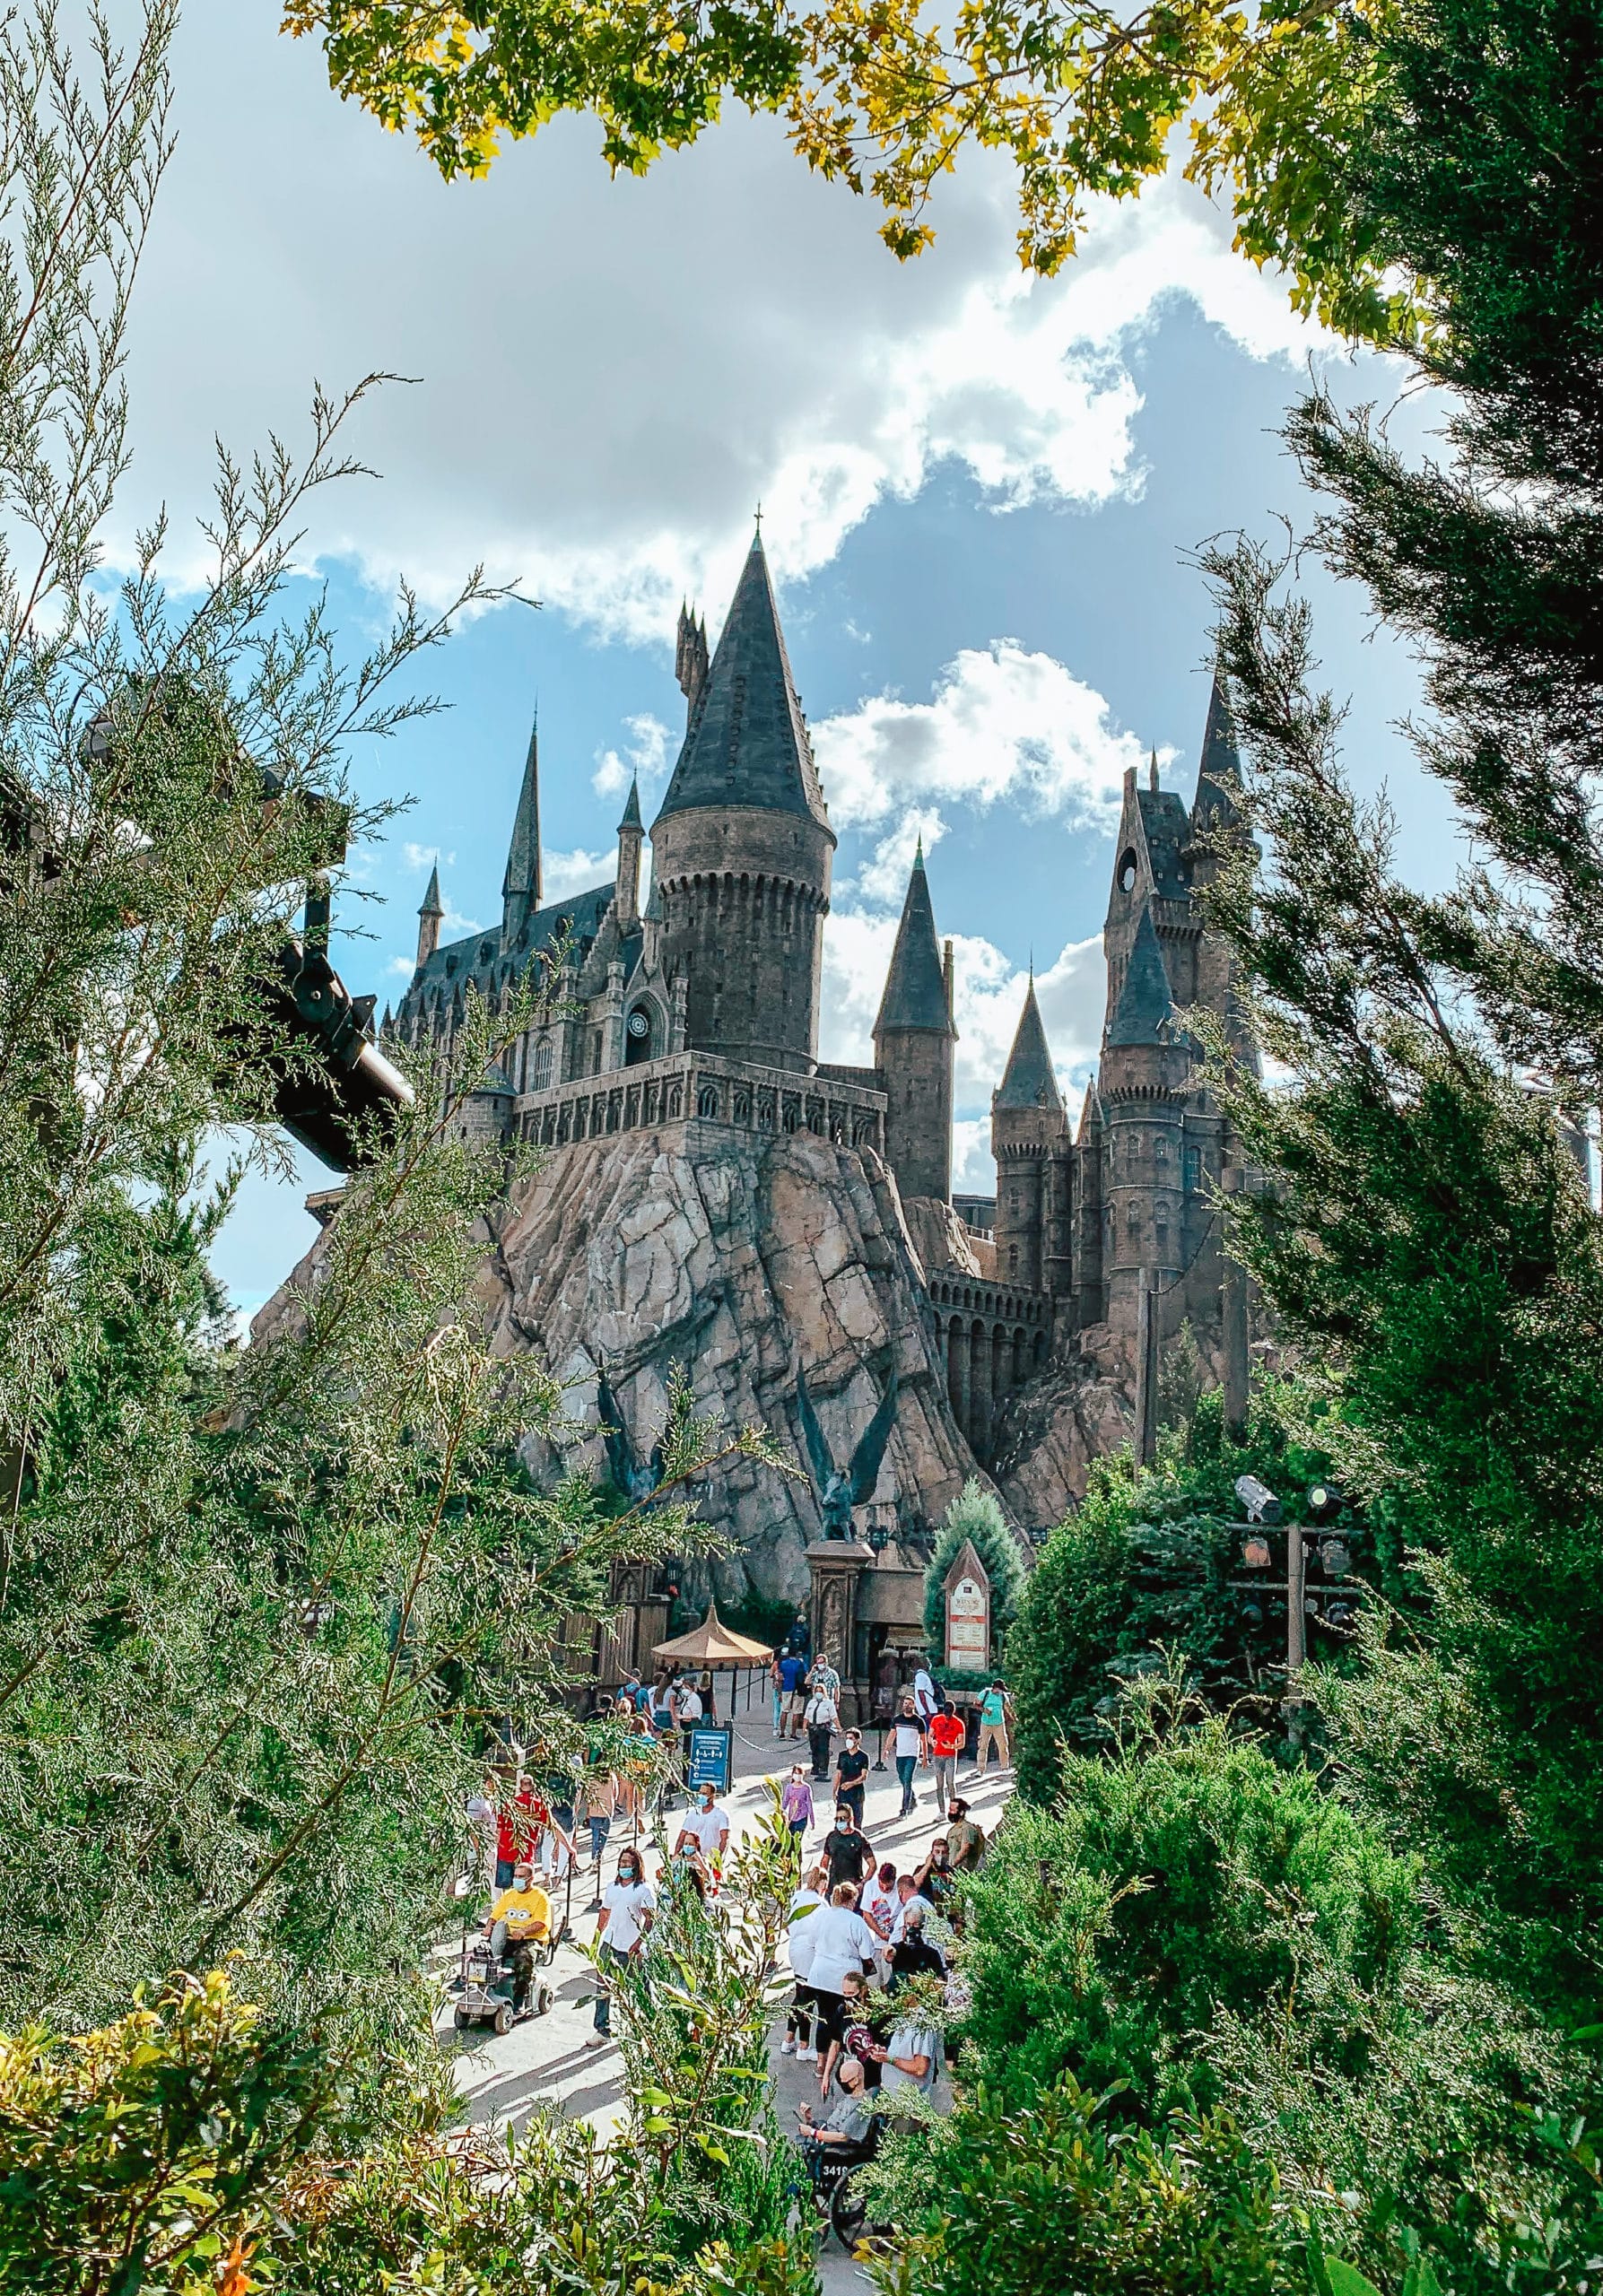 Harry Potter and the Forbidden Journey in Wizarding World — UO FAN